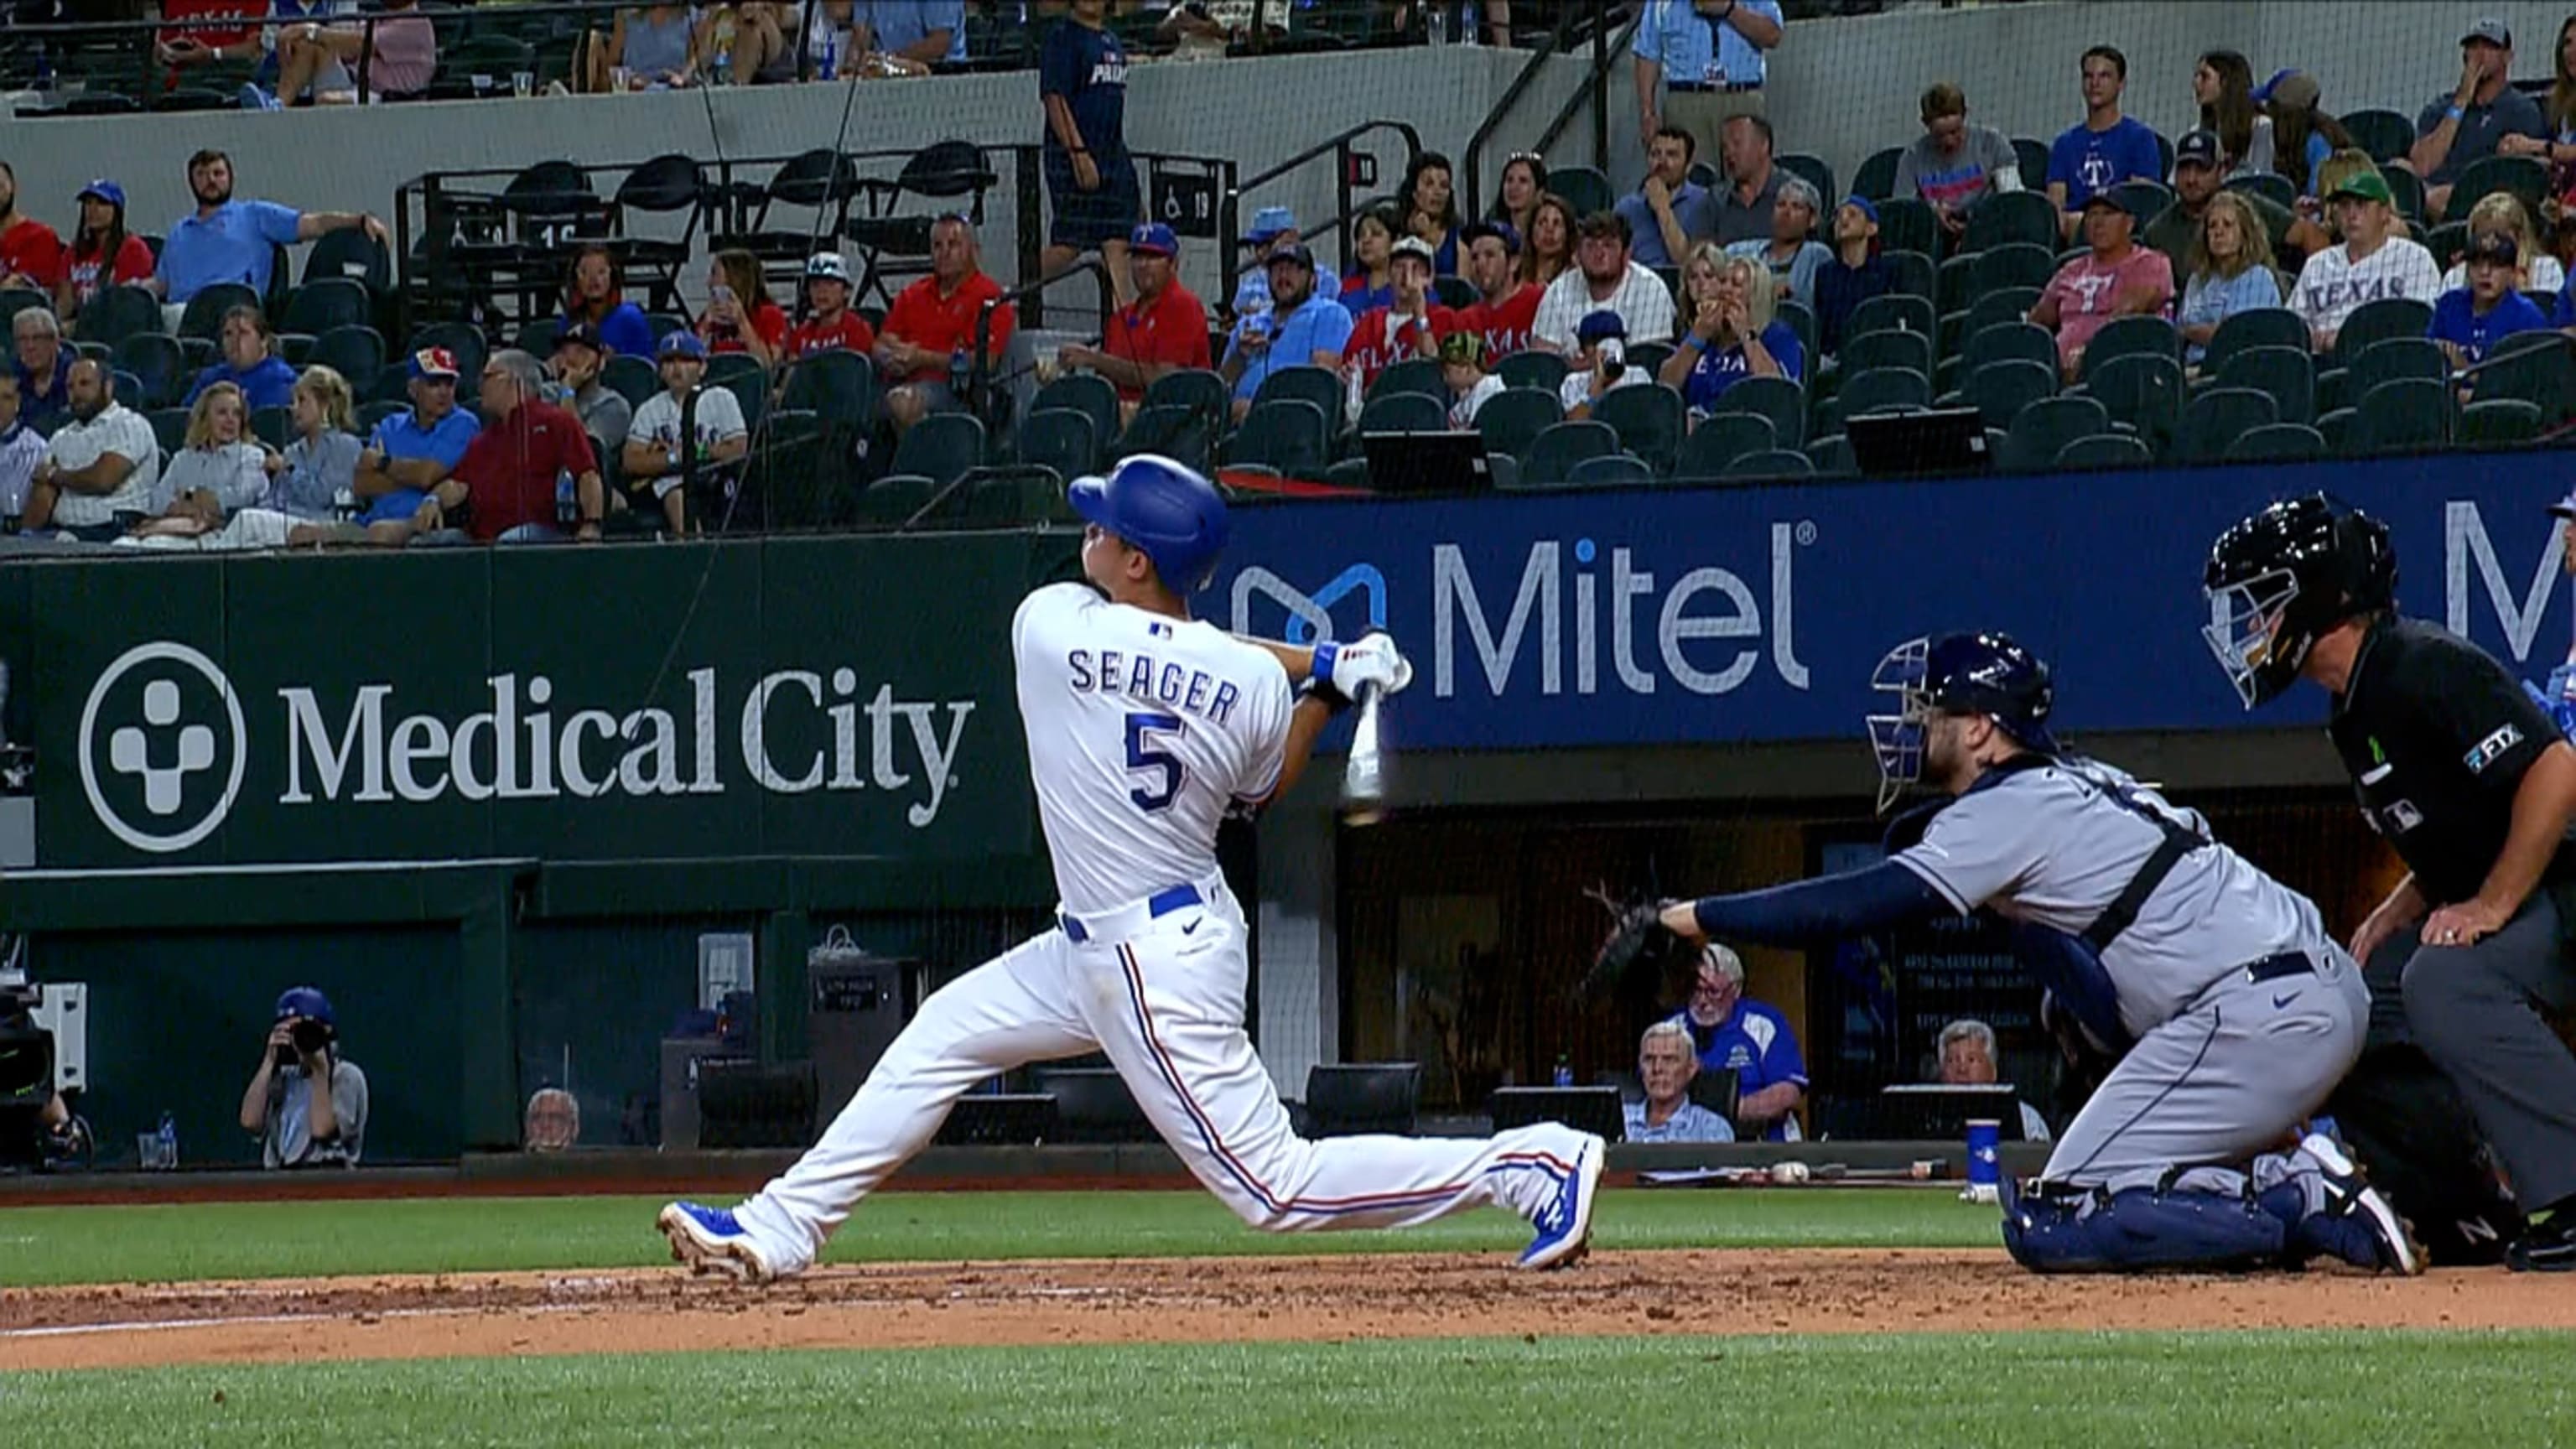 Corey Seager having home success with Rangers